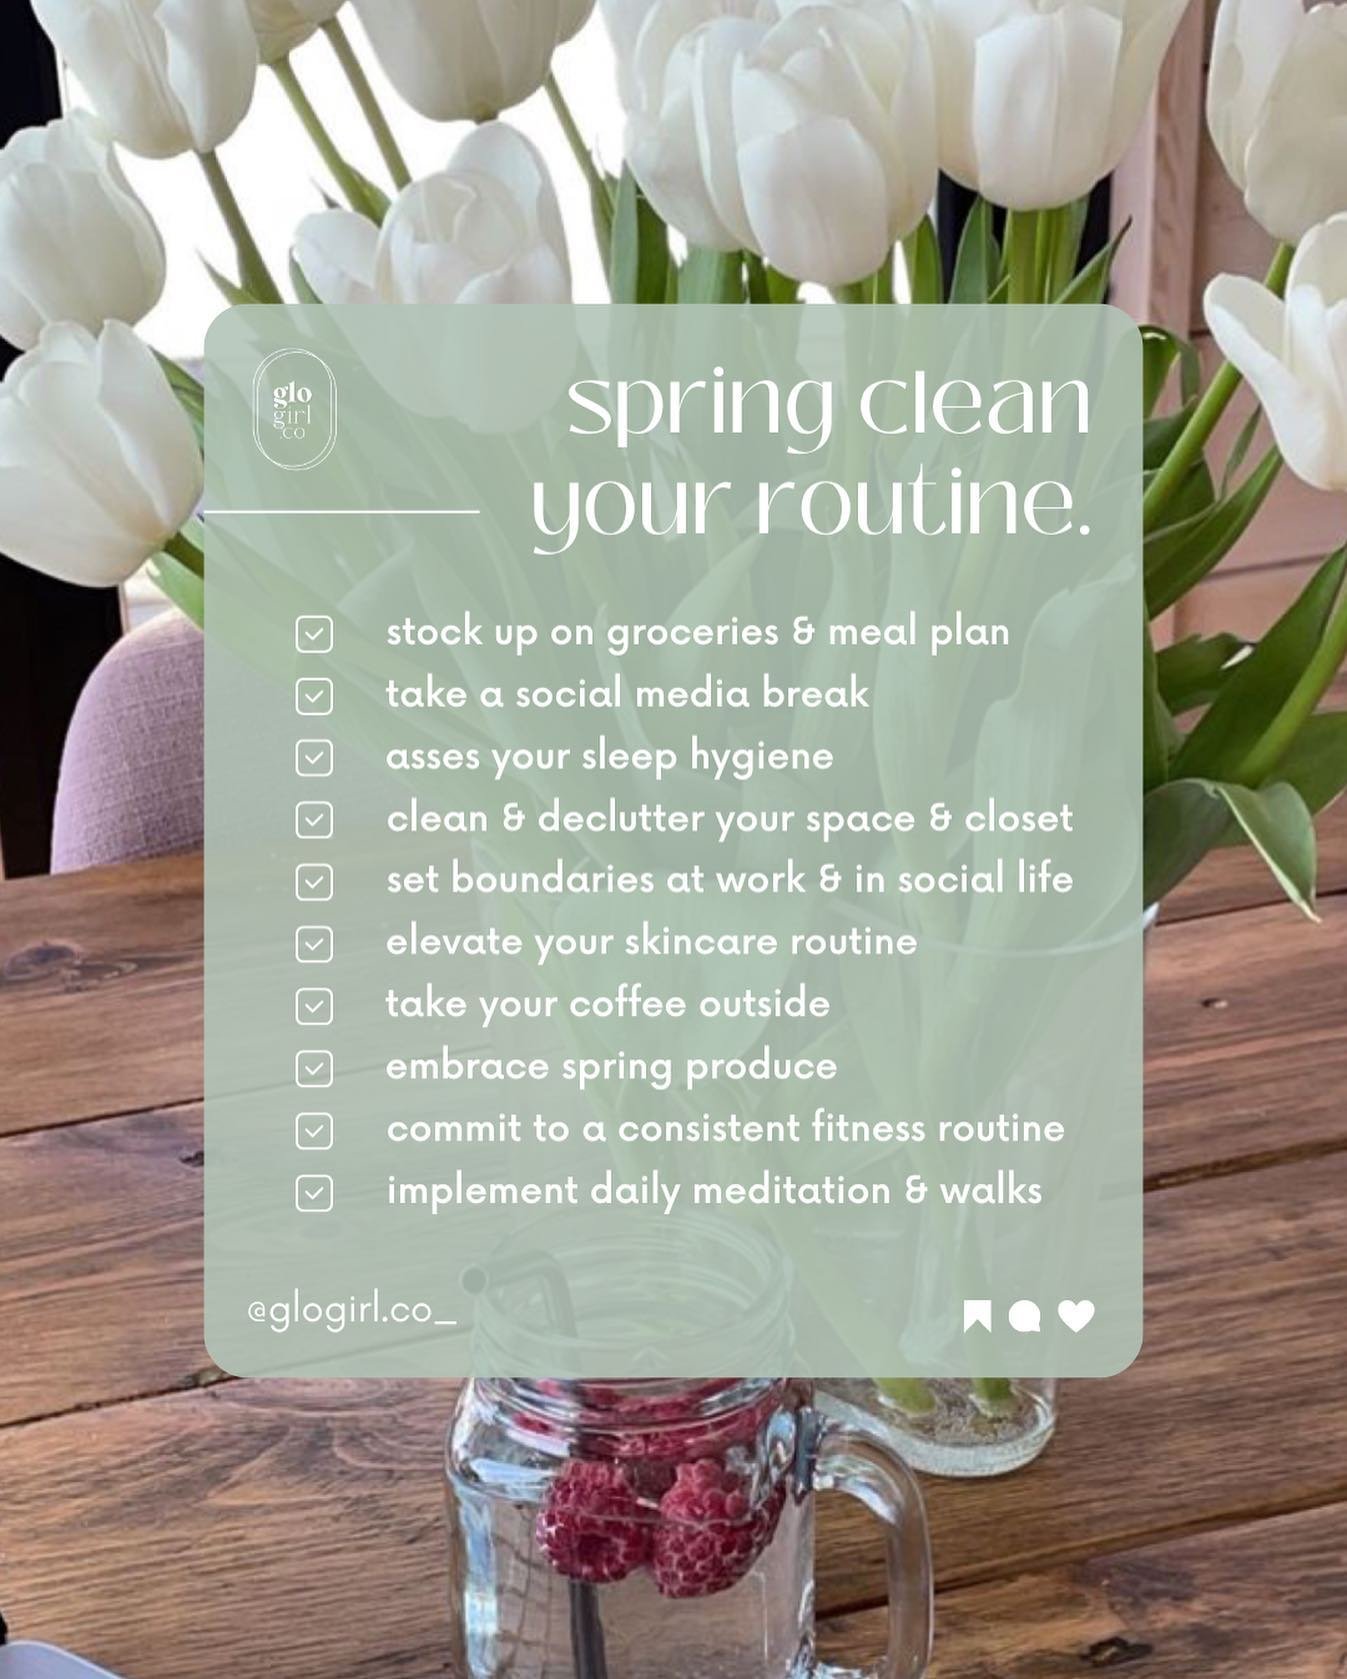 spring cleaning for the soul 🌸💫🧺

#wellnesschecklist #springwellness #springclean #routinereset #healthyhabits